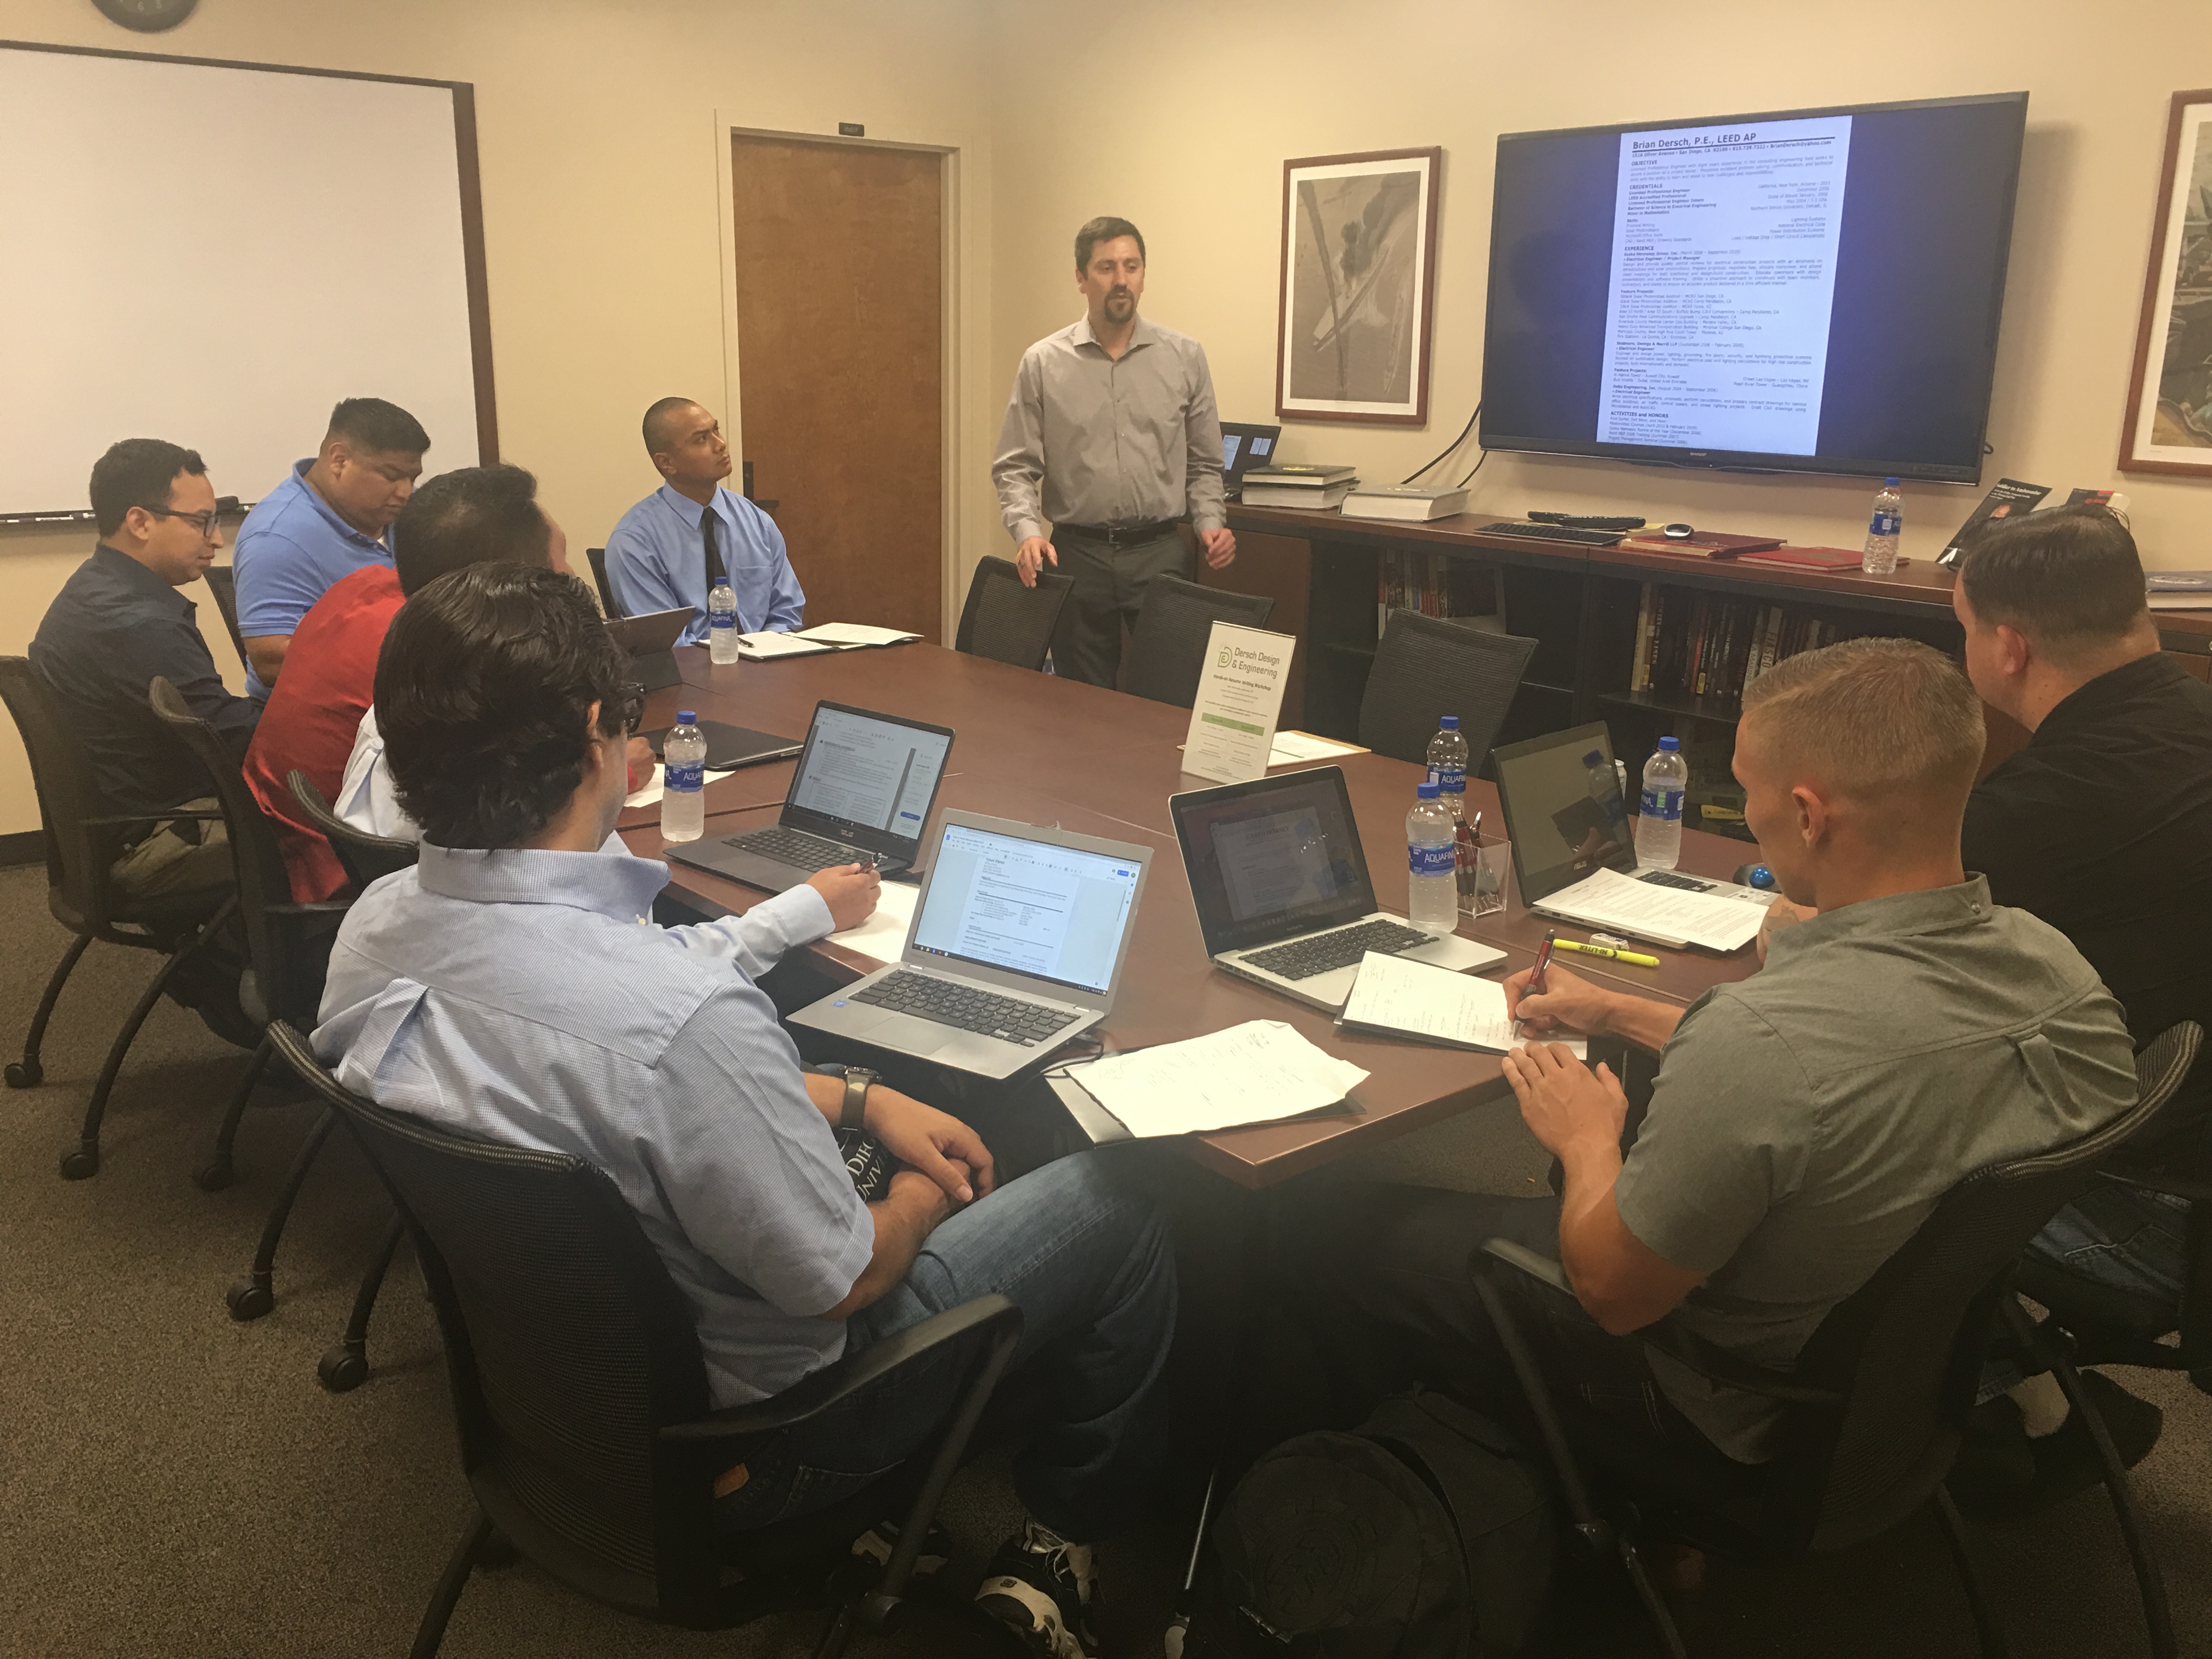 Dersch conducts a resume writing workshop for San Diego State University Troops to Engineers.